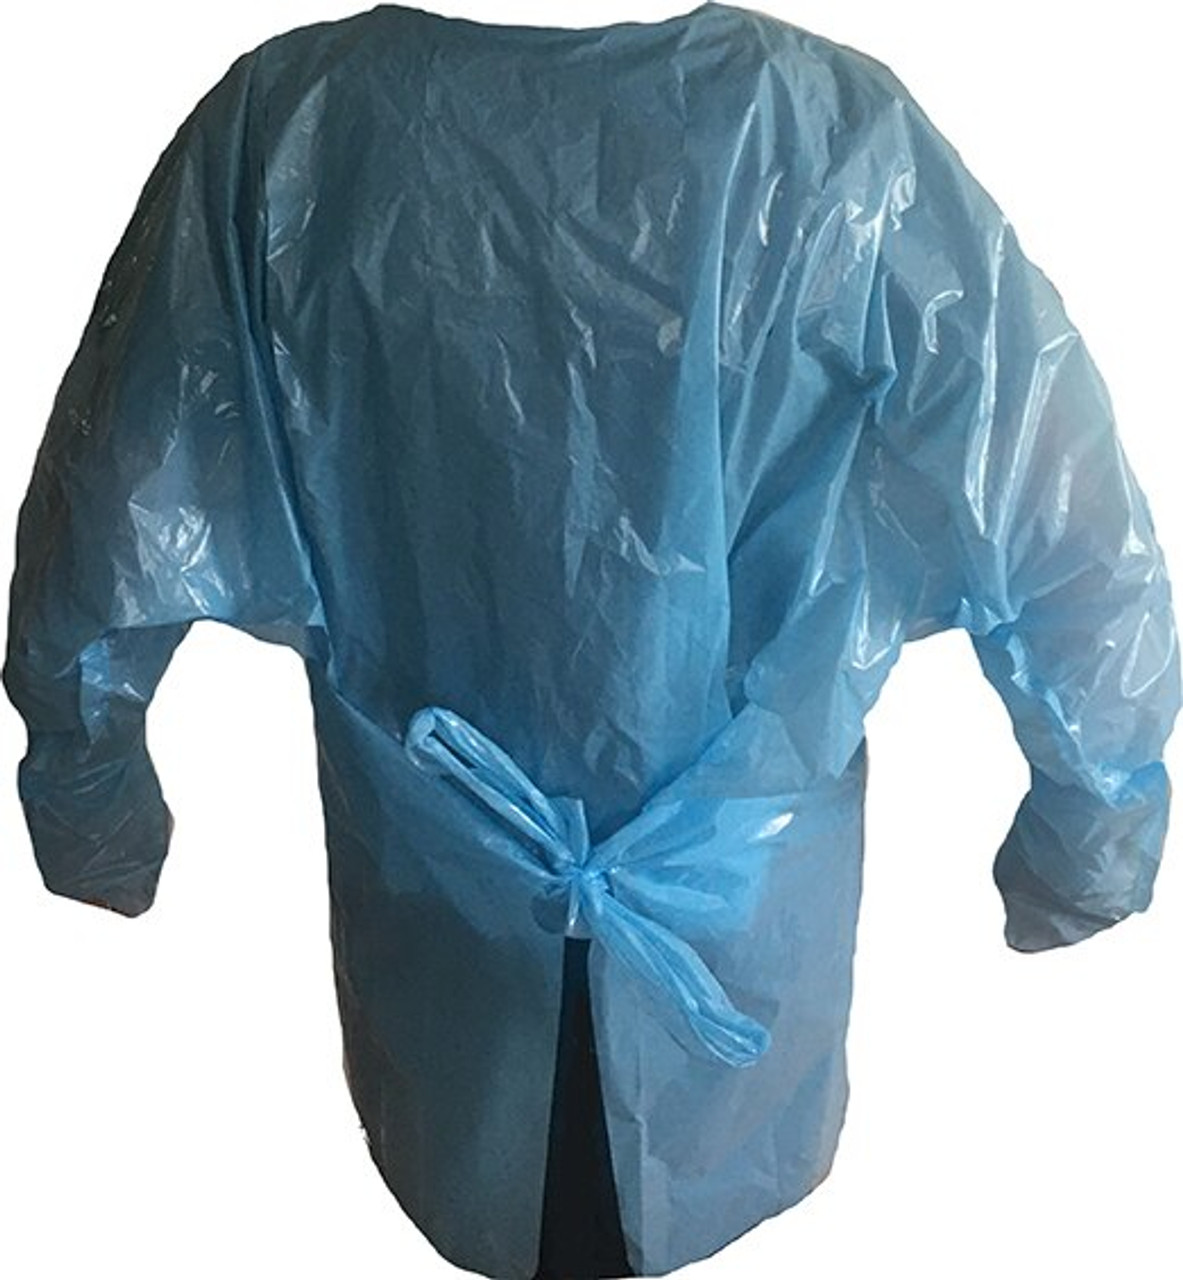 Amazon.com: [50-Pack] Disposable Isolation Gown, FDA Registered, AAMI Level  1 PP & PE 30g, Fully Closed Double Tie Back, Elastic Cuffs, Fluid  Resistant, Unisex (50) : Industrial & Scientific